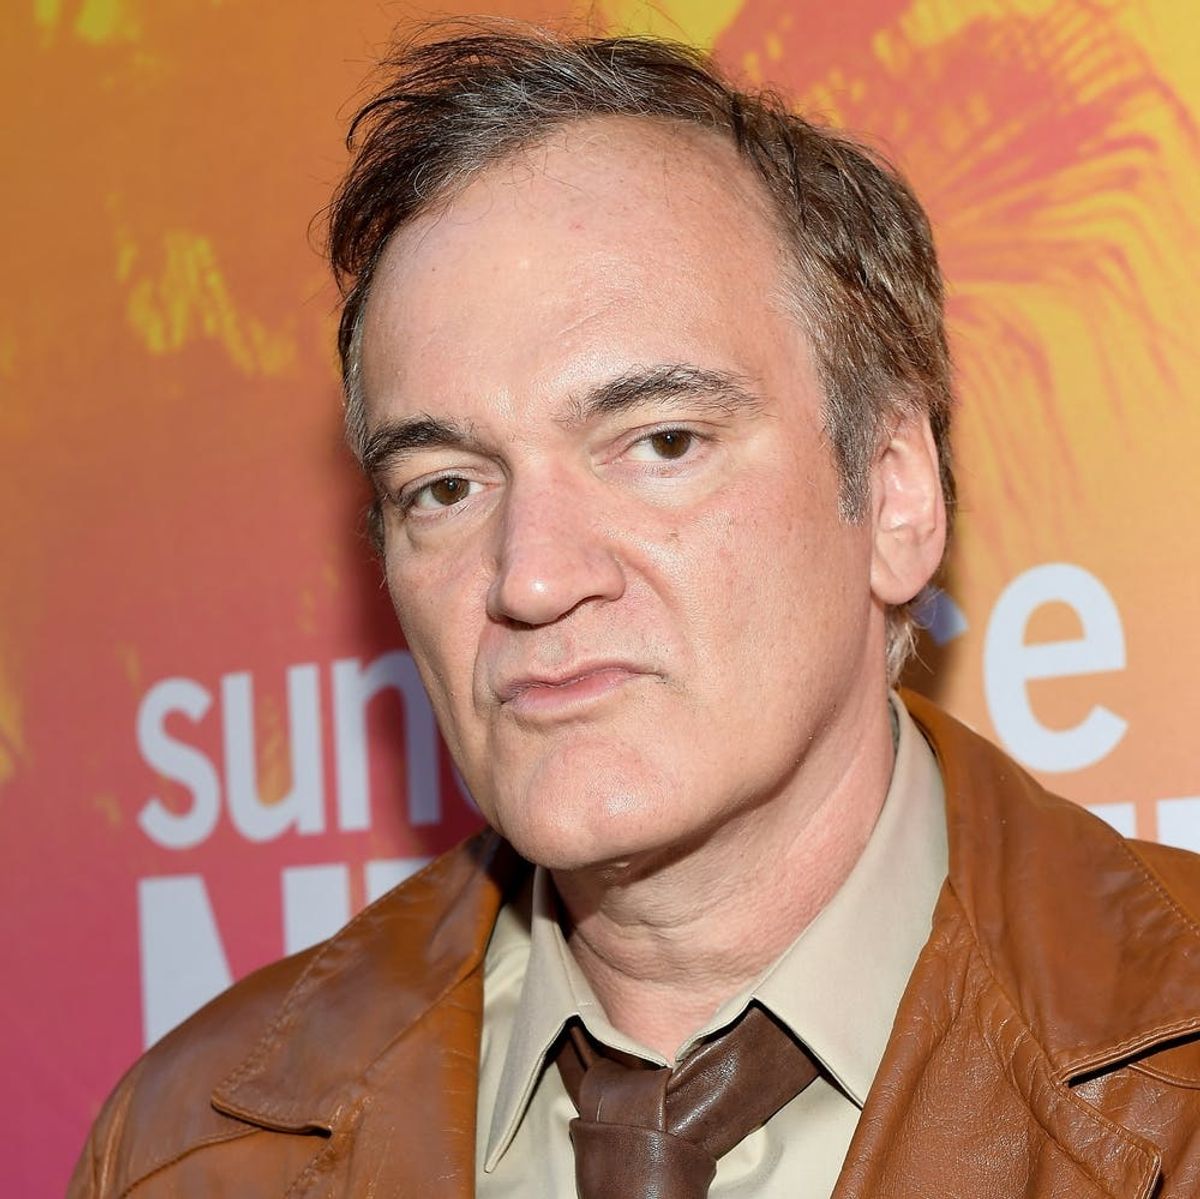 Quentin Tarantino Under Fire for Response to Uma Thurman Interview